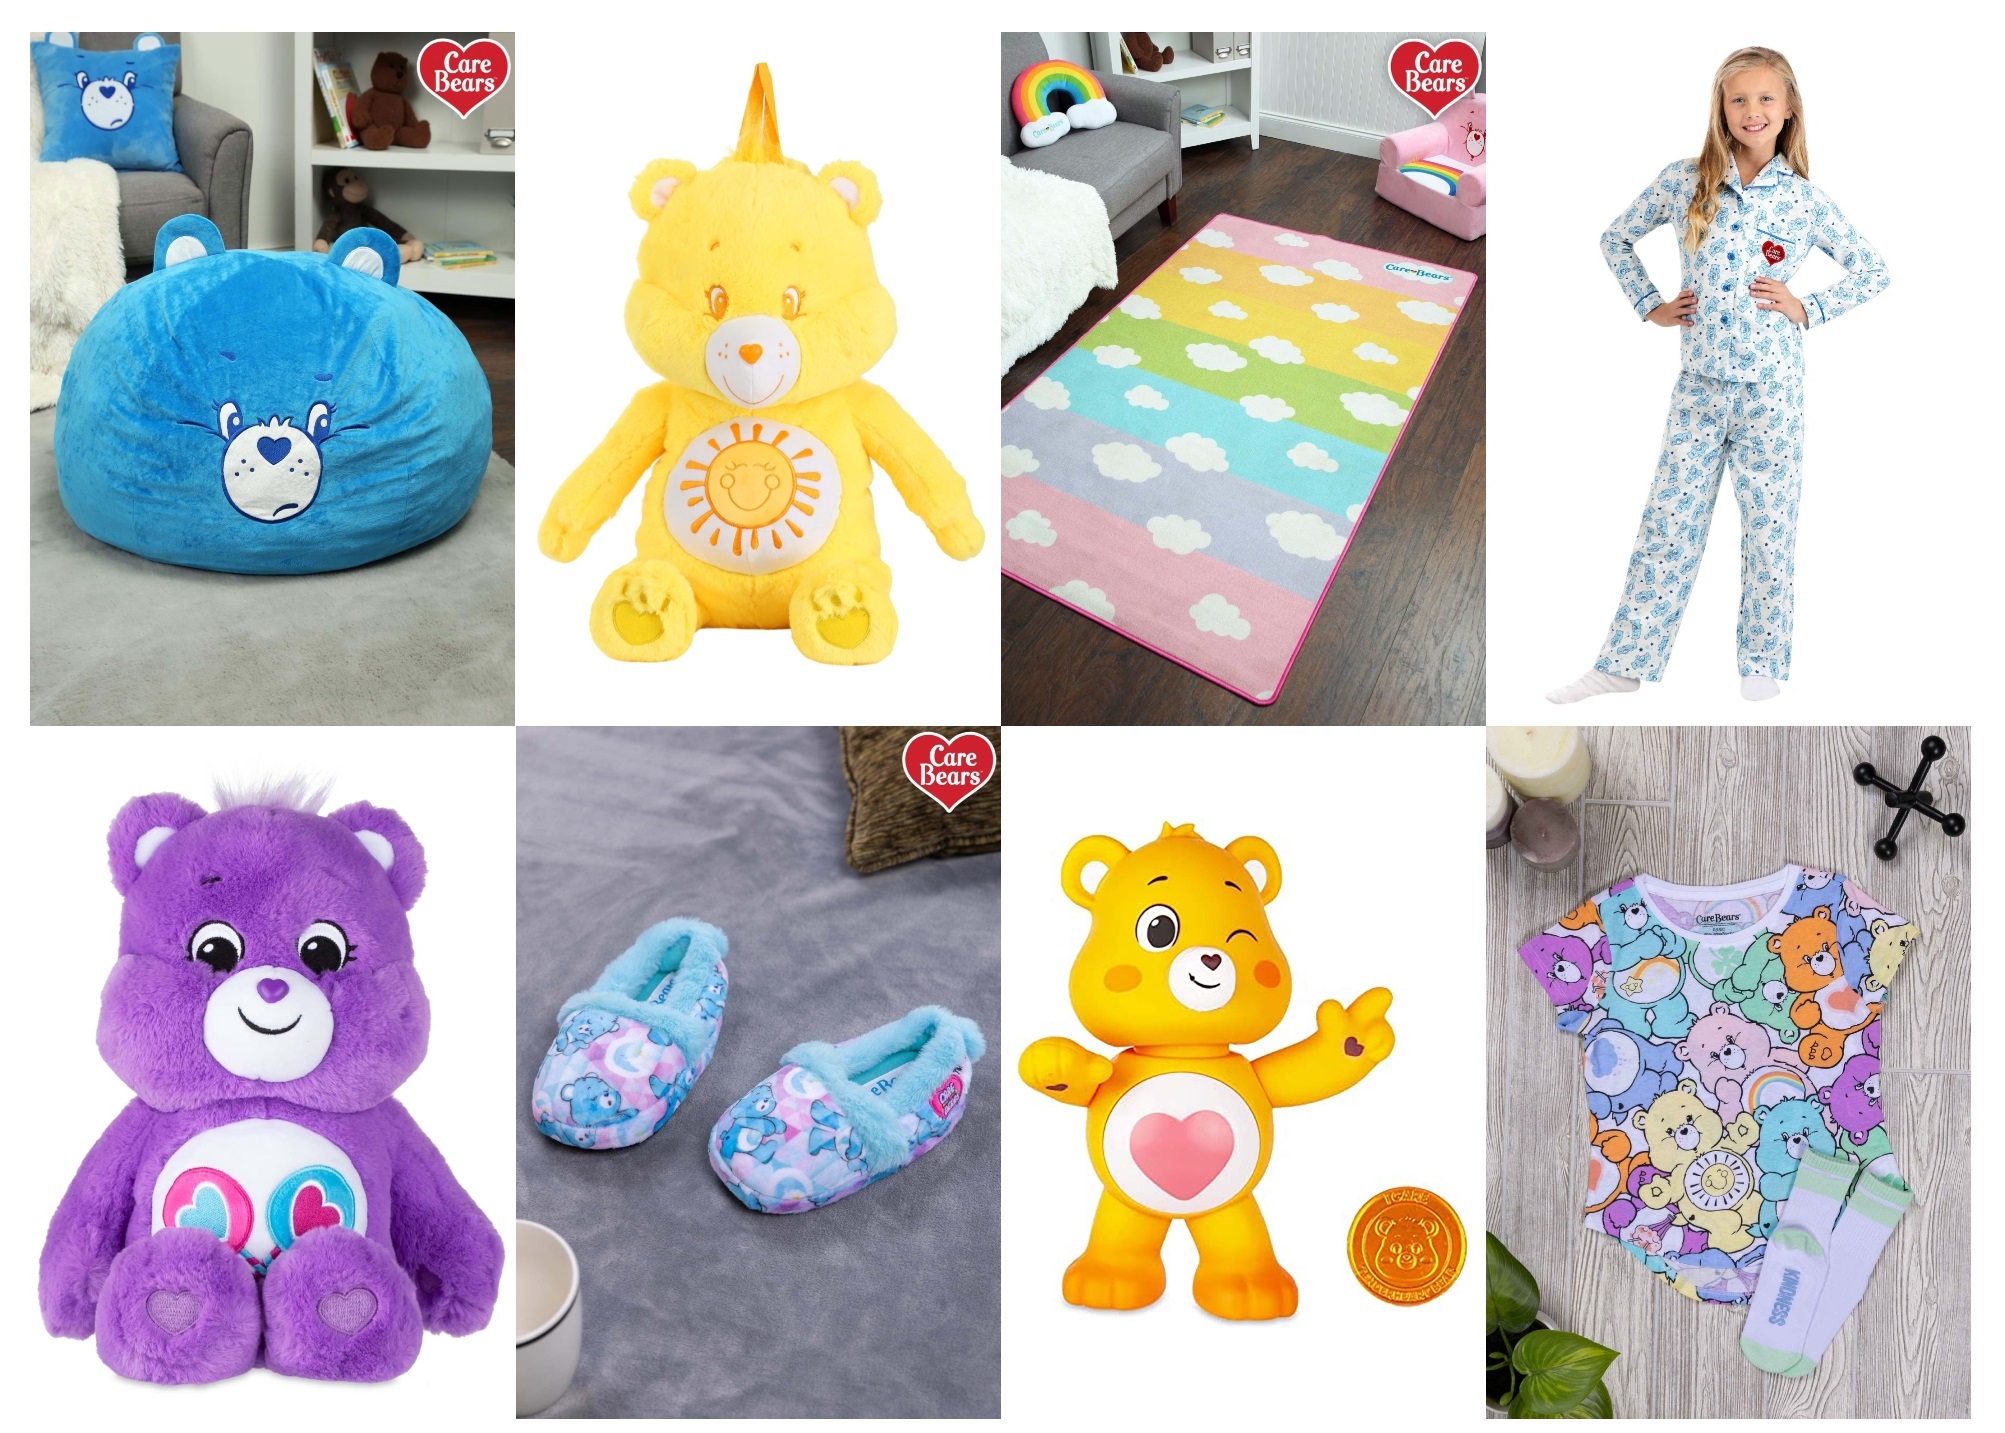 Care Bears Gifts for Girls